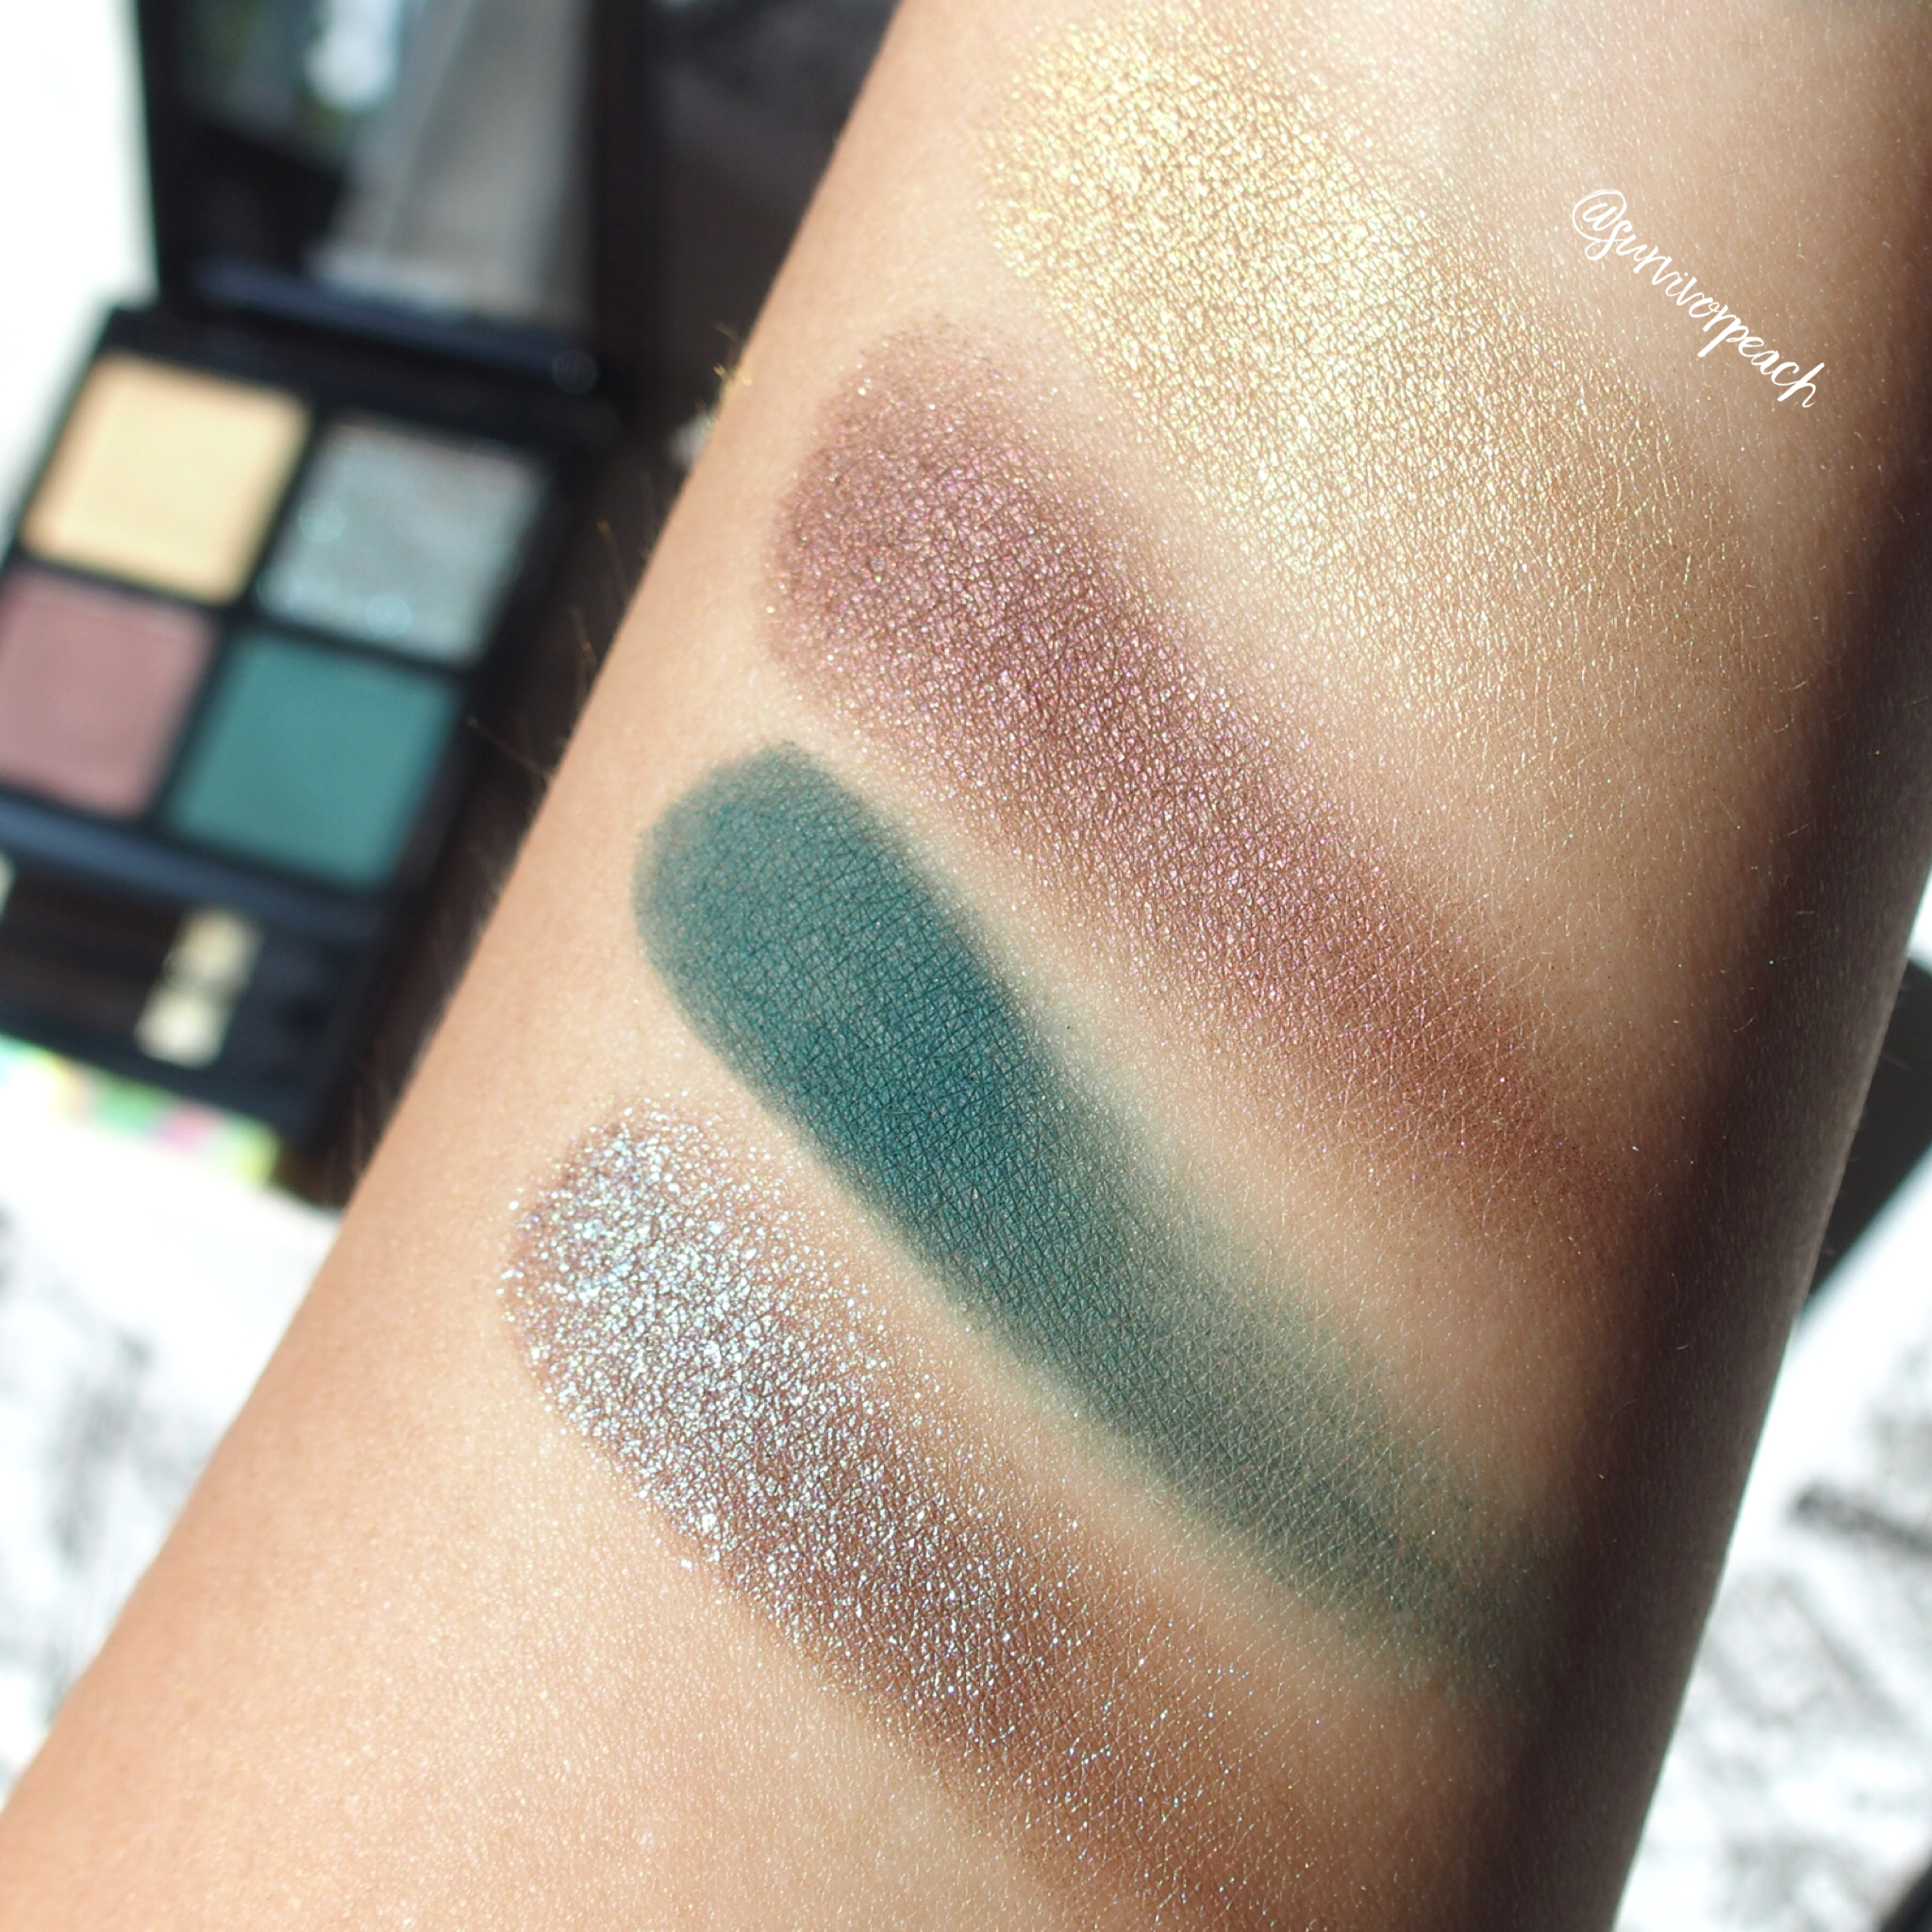 Tomford Photosynthesex Eye Quad review and swatches — Survivorpeach